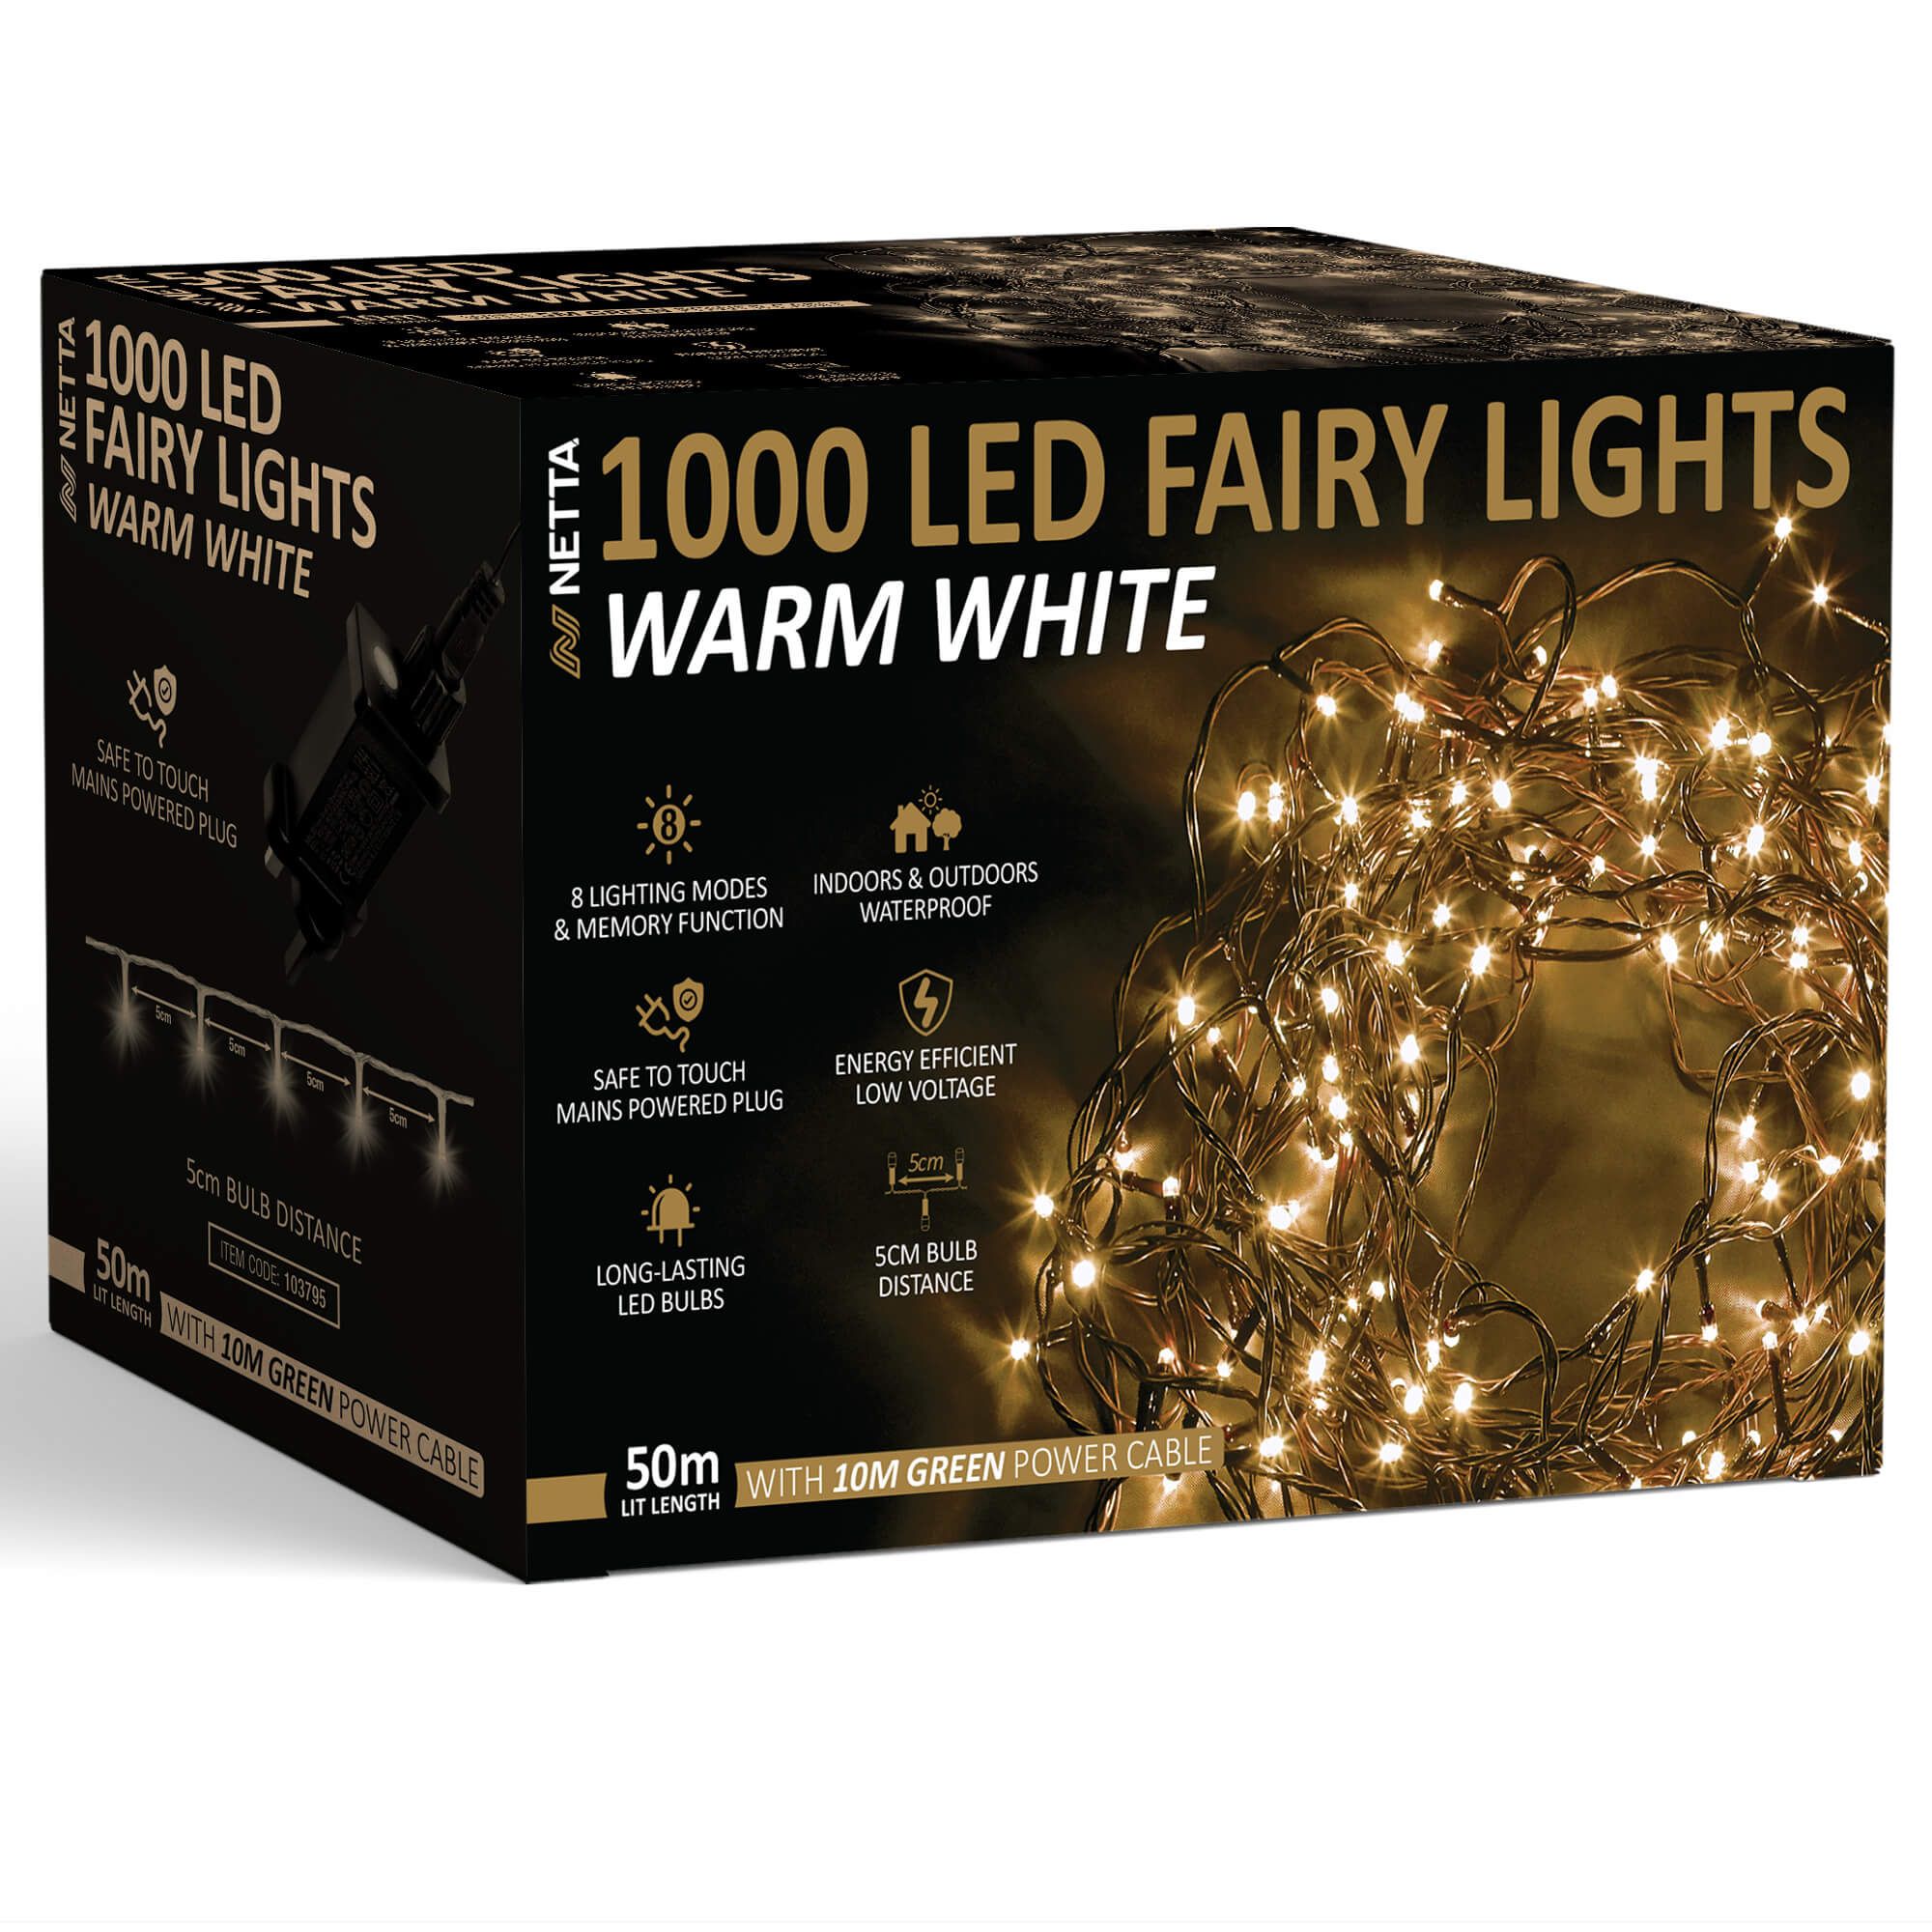 1000 LED Fairy Lights 50M Christmas Tree Lights Green Cable - Warm White